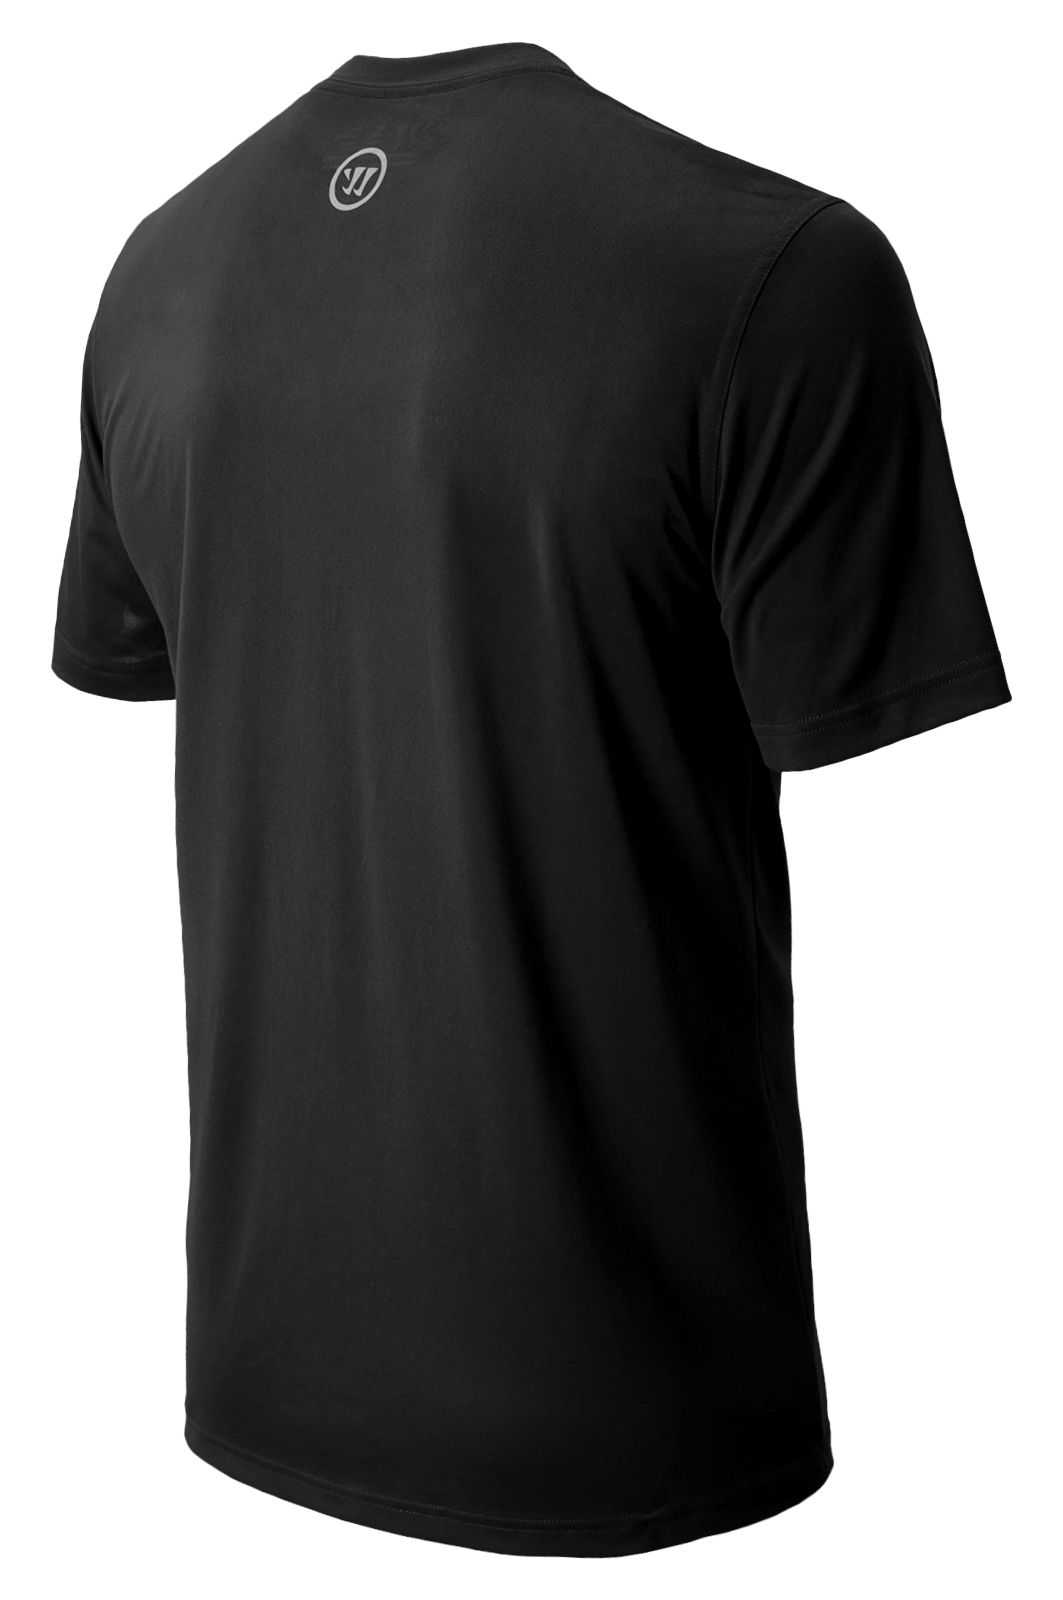 Wartech Tee SS, Black image number 0